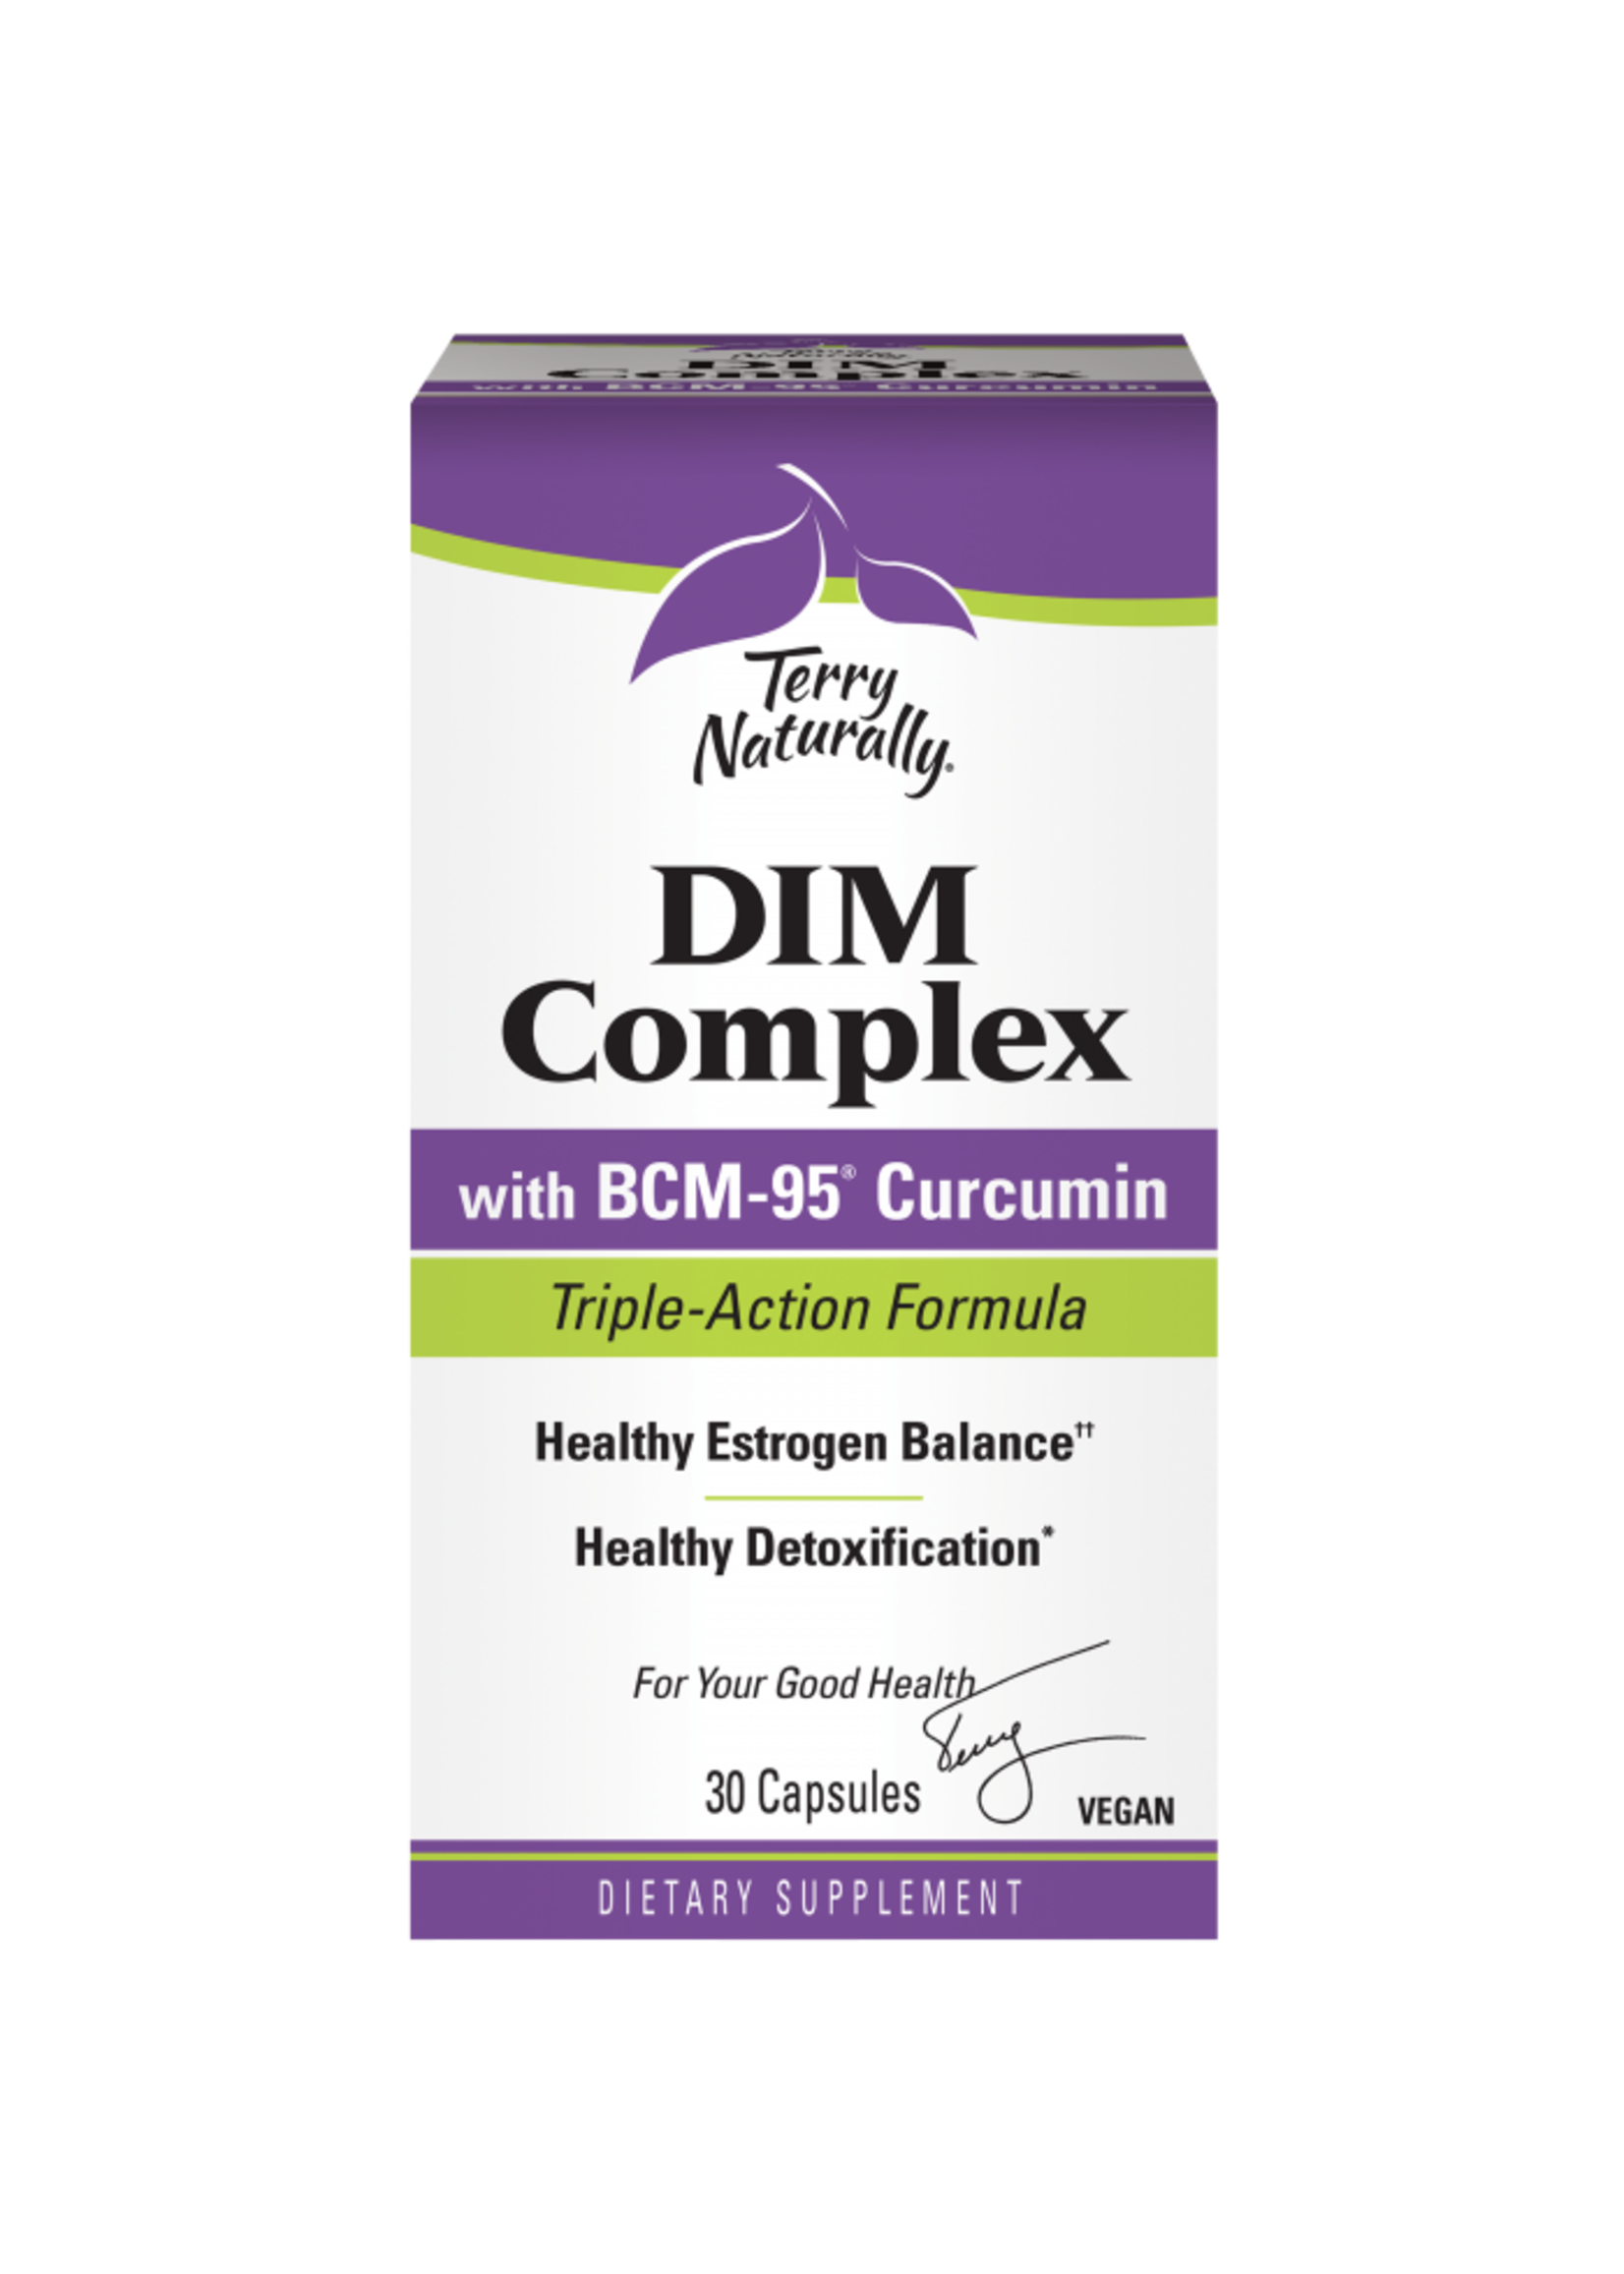 Terry Naturally DIM Complex with BCM-95 Curcumin